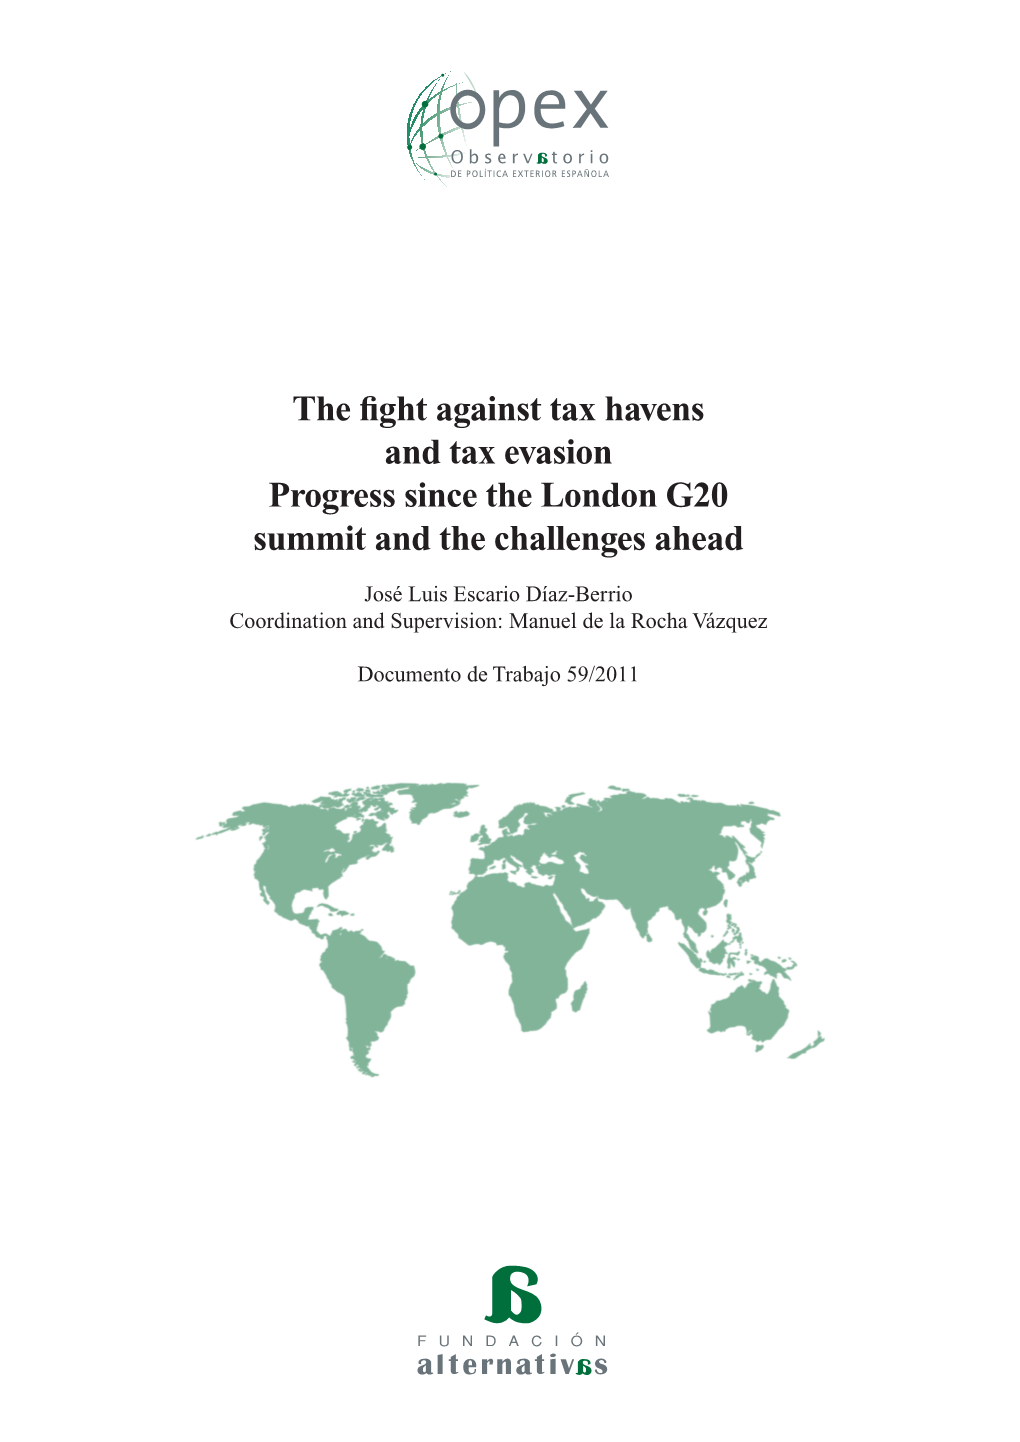 The Fight Against Tax Havens and Tax Evasion Progress Since the London G20 Summit and the Challenges Ahead